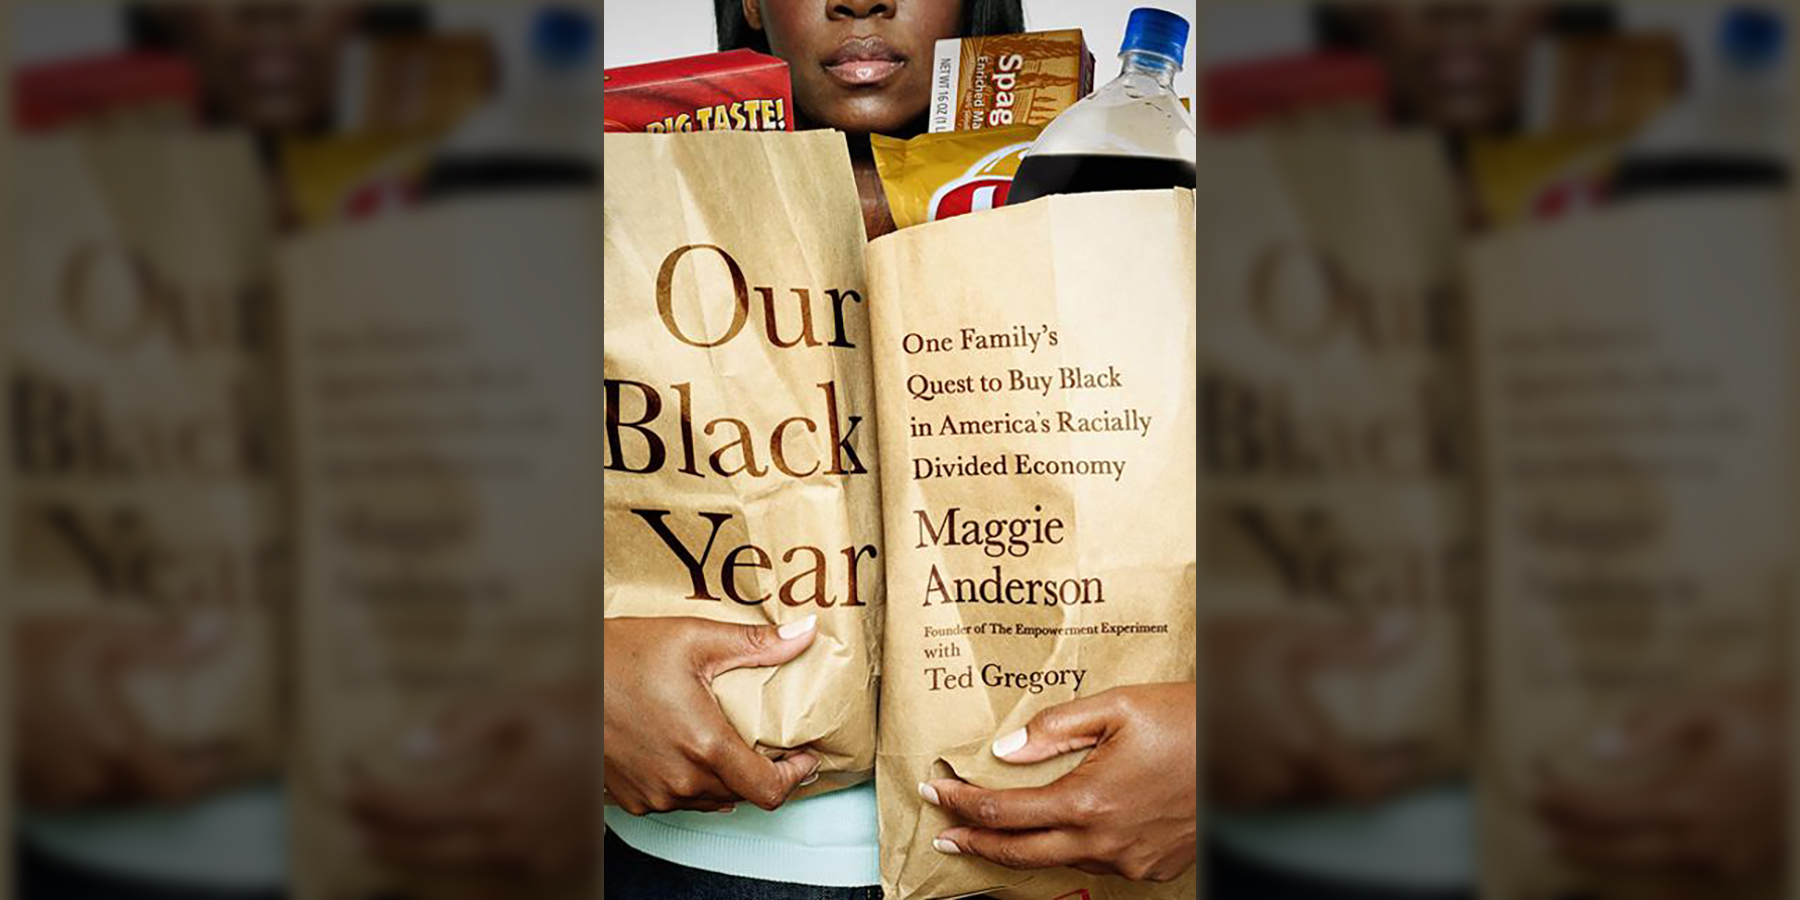 Our Black Year: One Family’s Quest to Buy Black in America’s Racially Divided Economy